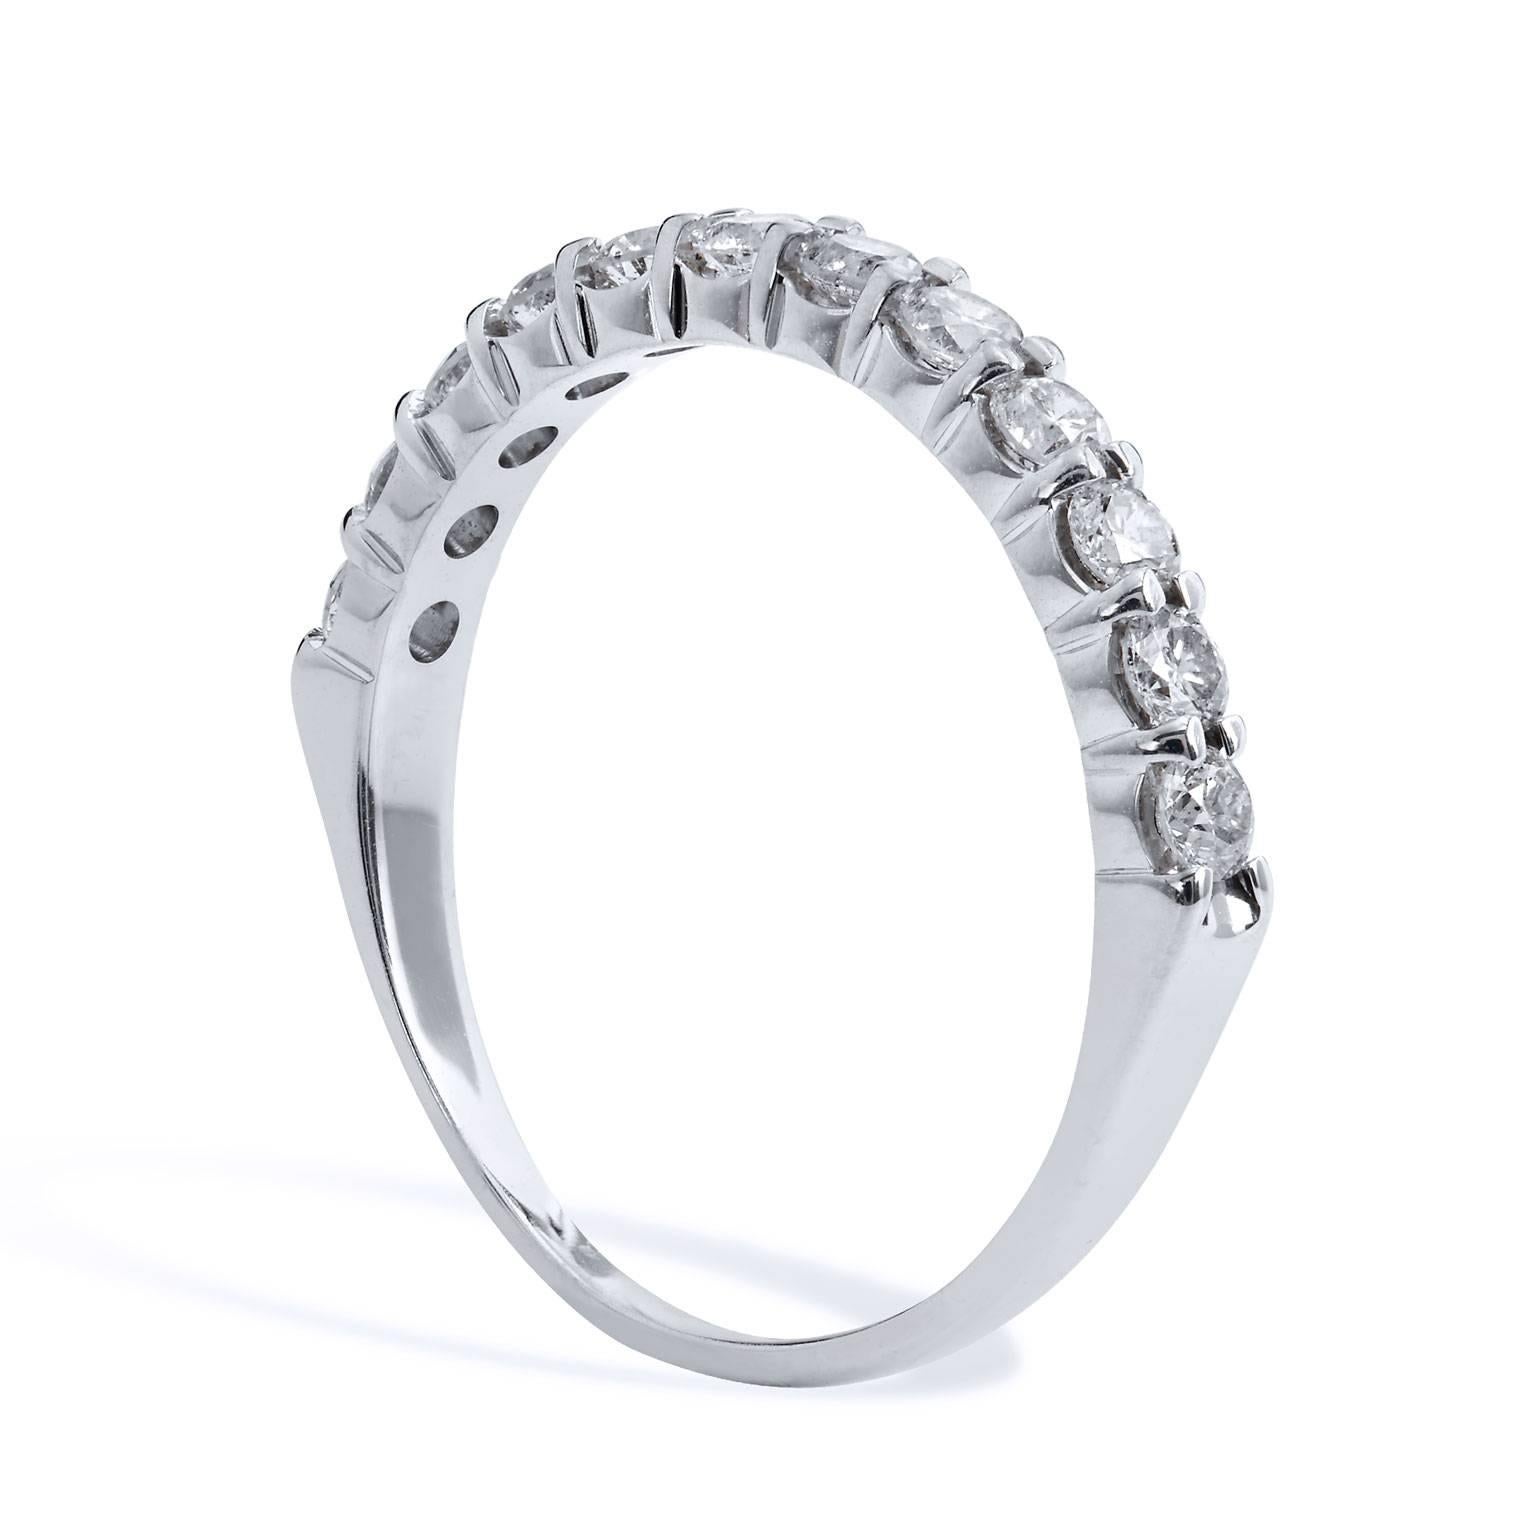 Twelve round diamonds (K/L/SI2), with a total weight of 0.42 carat, are affixed to a 14 karat white gold shared-prong shank in this previously loved band ring. This ring is simply lovely.
